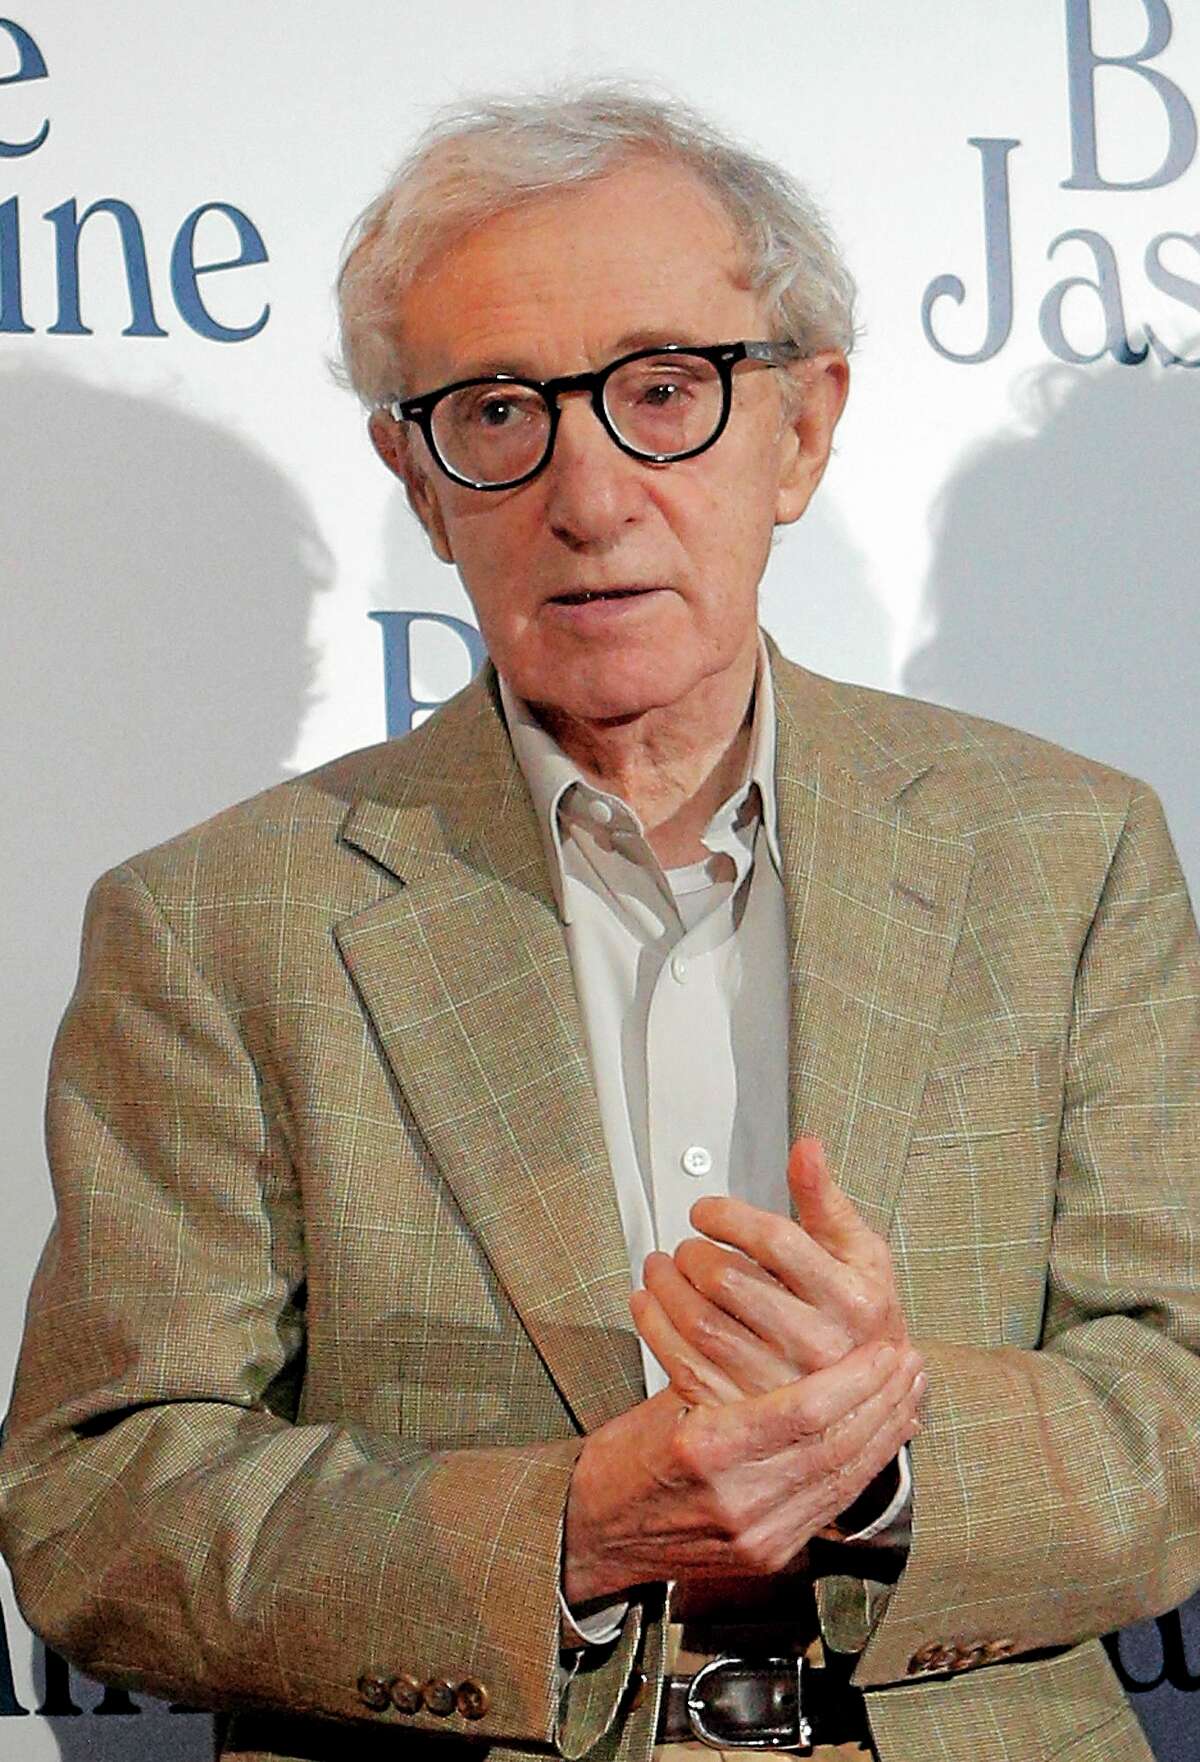 This Aug. 27, 2013 file photo shows director and actor Woody Allen at the French premiere of “Blue Jasmine,” in Paris. In an Op-Ed piece by Nicholas Kristof published on the New York Times website on Saturday, Feb. 1, 2014, the author referenced a letter by Allen's adopted daughter Dylan Farrow, 28, that he posted on his blog, detailing how she was molested by Allen while growing up.